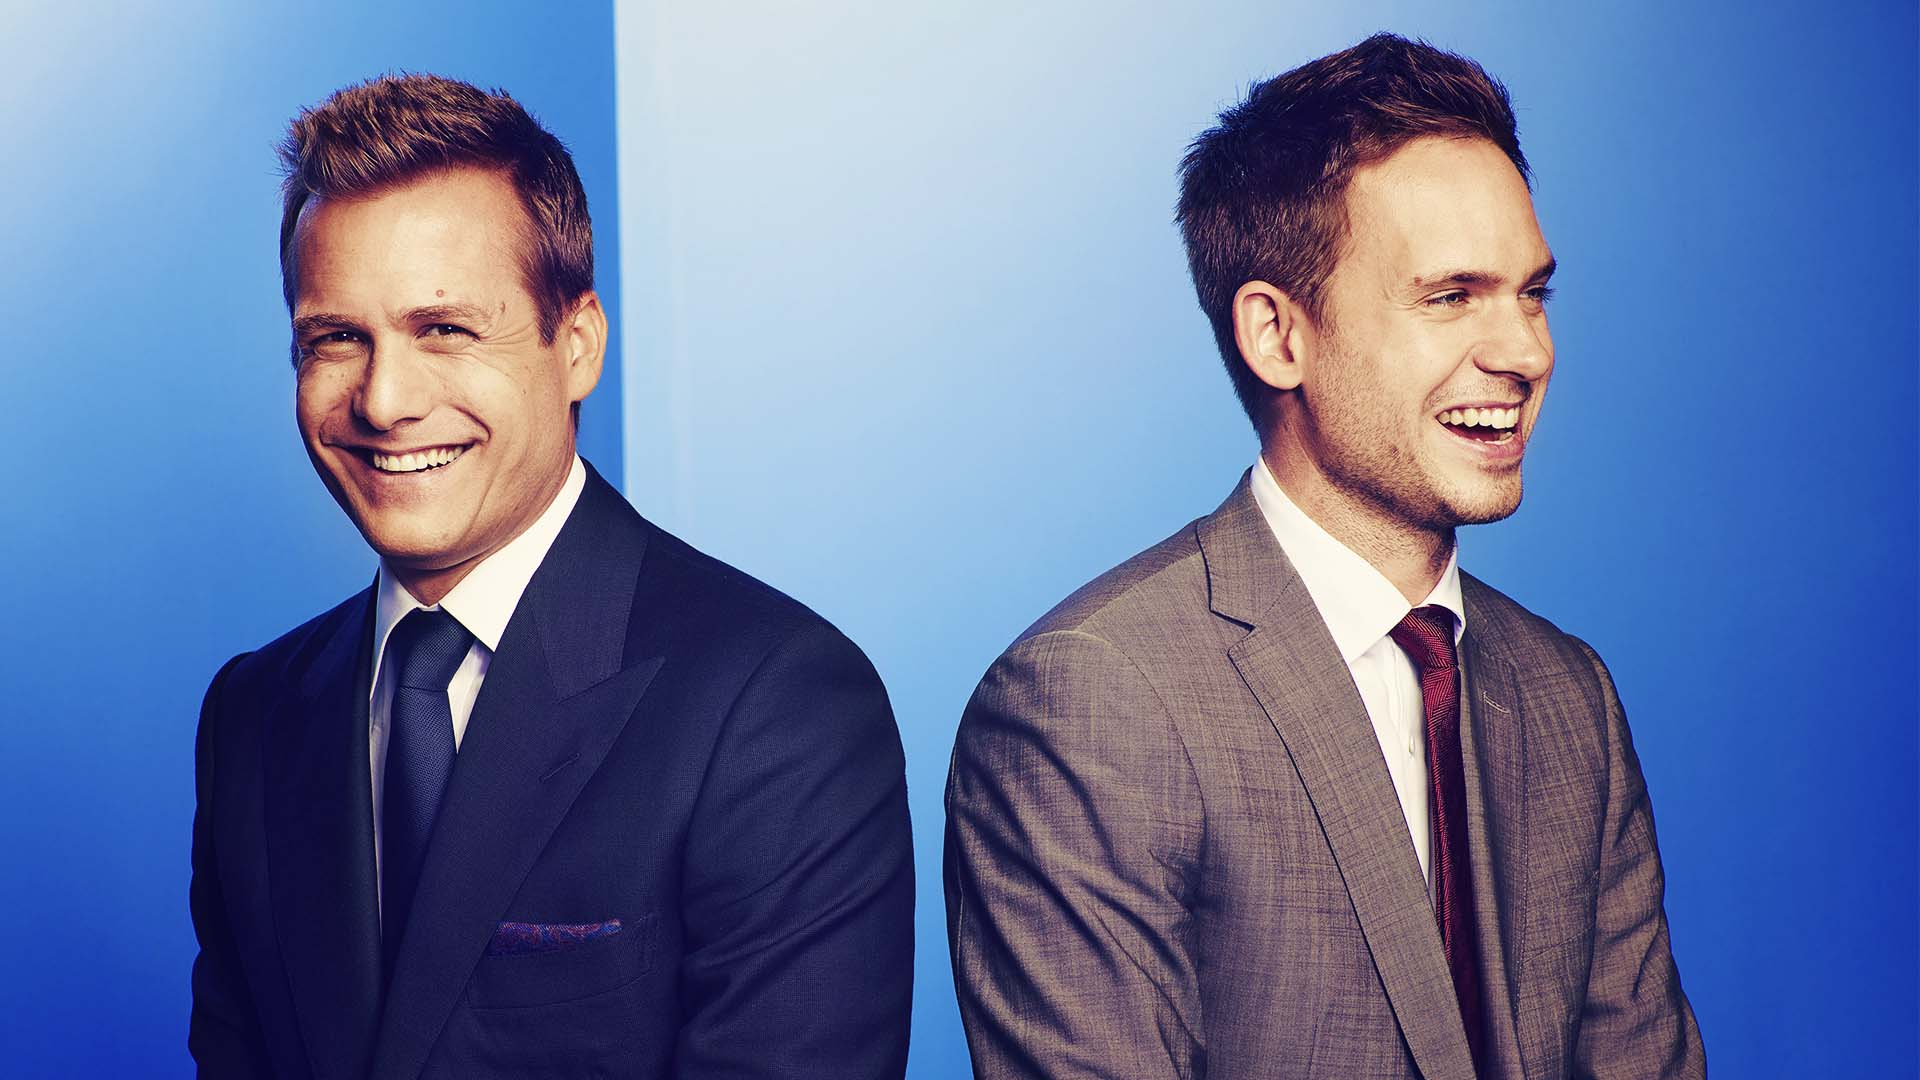 1920x1080 Harvey and Mike Suits Hintergrund (38582739) Fanpop